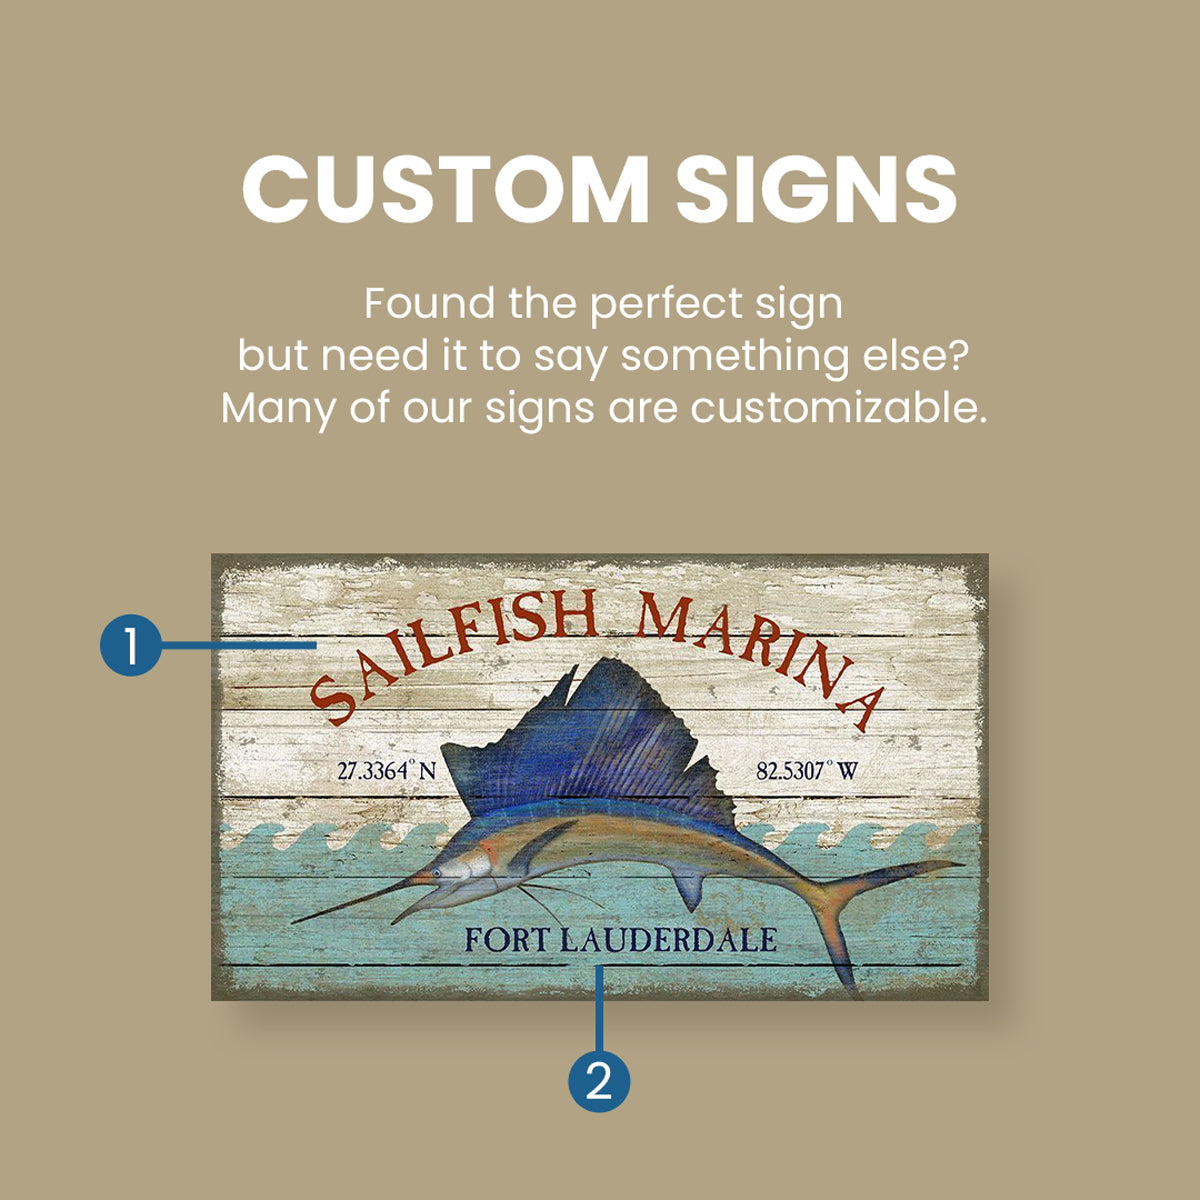 Custom Signs. Found the perfect sign but need it to say something else? Many of our signs are customizable.